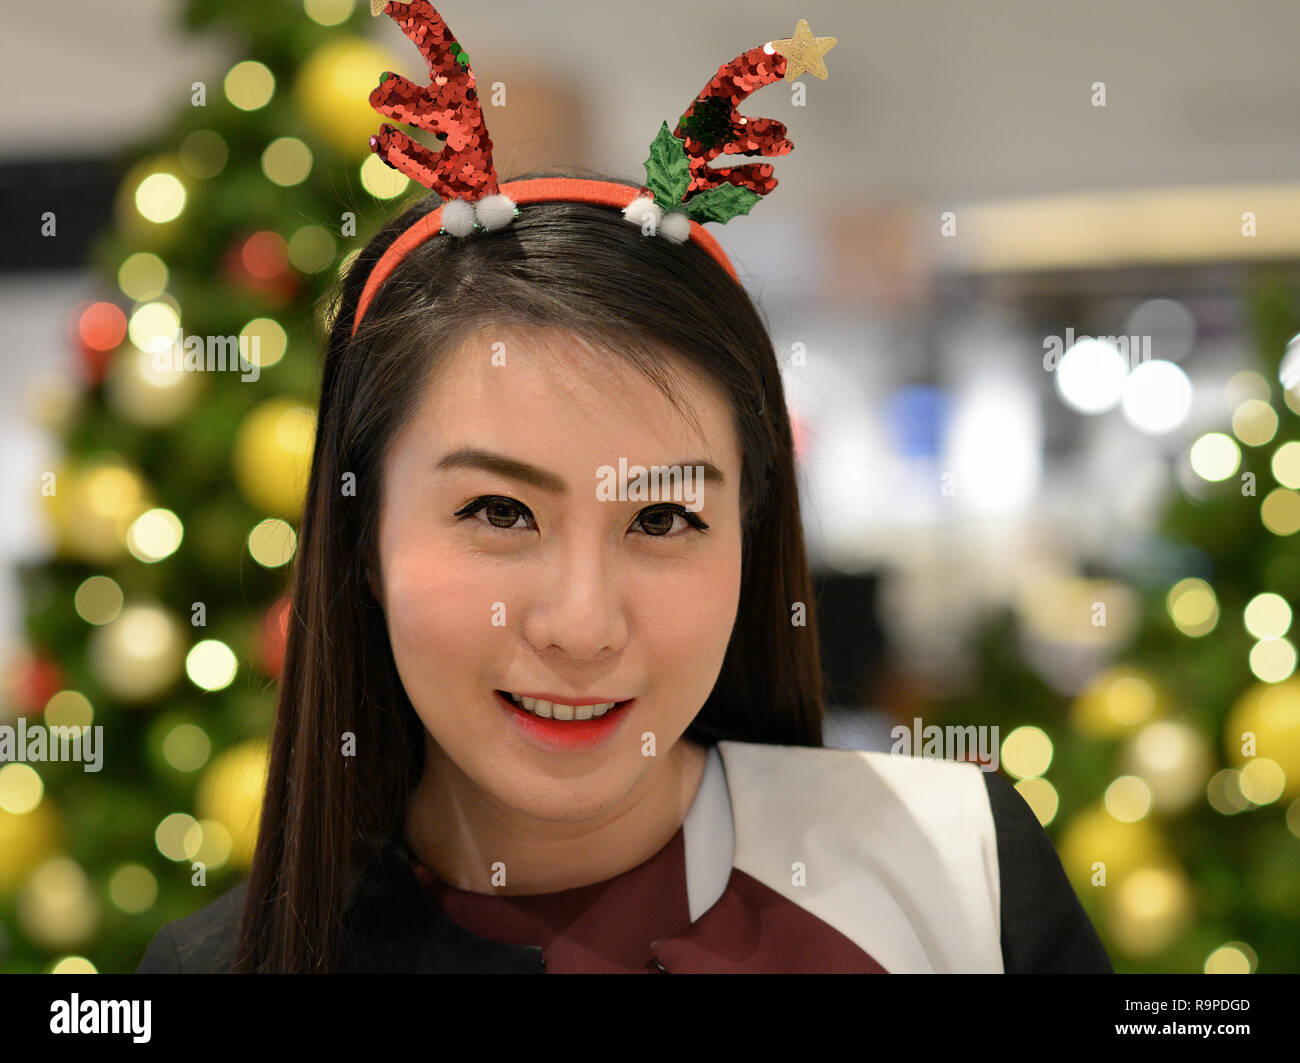 Young Thai saleslady with a Christmas headband poses for the camera in front of a decorated Christmas tree. Stock Photo